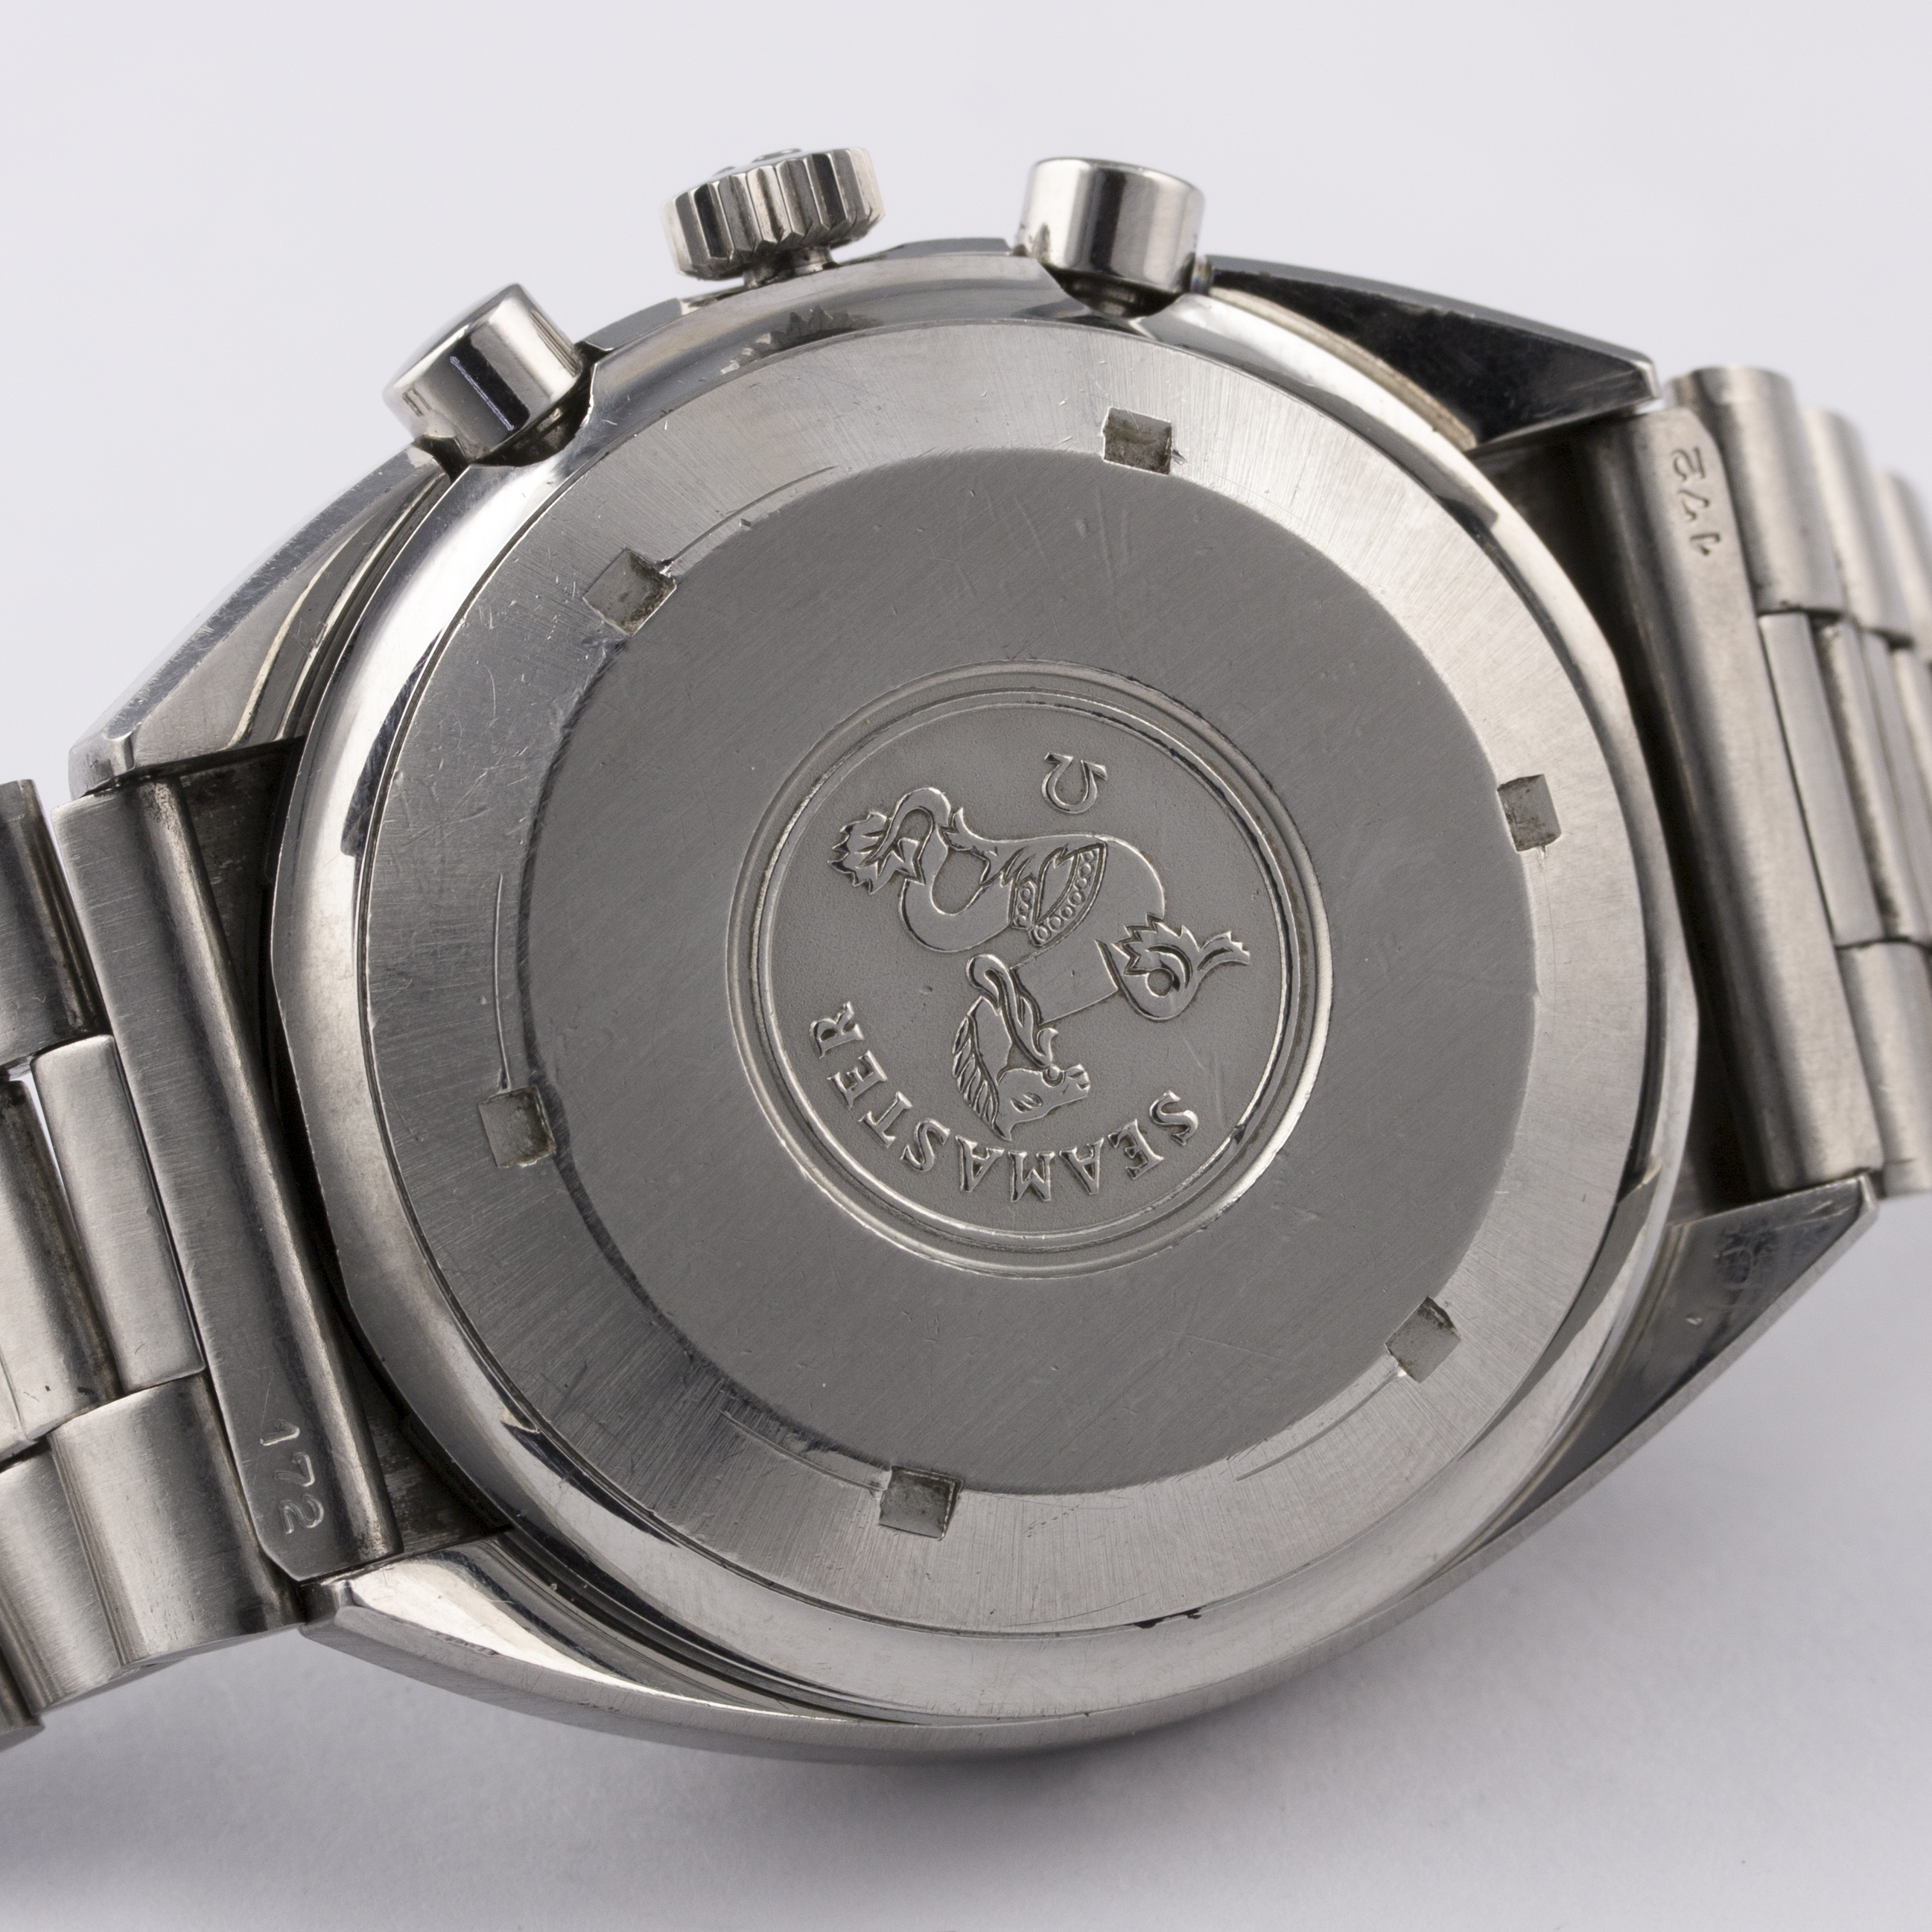 A GENTLEMAN'S STAINLESS STEEL OMEGA SPEEDMASTER MARK 4.5 AUTOMATIC CHRONOGRAPH BRACELET WATCH - Image 7 of 9